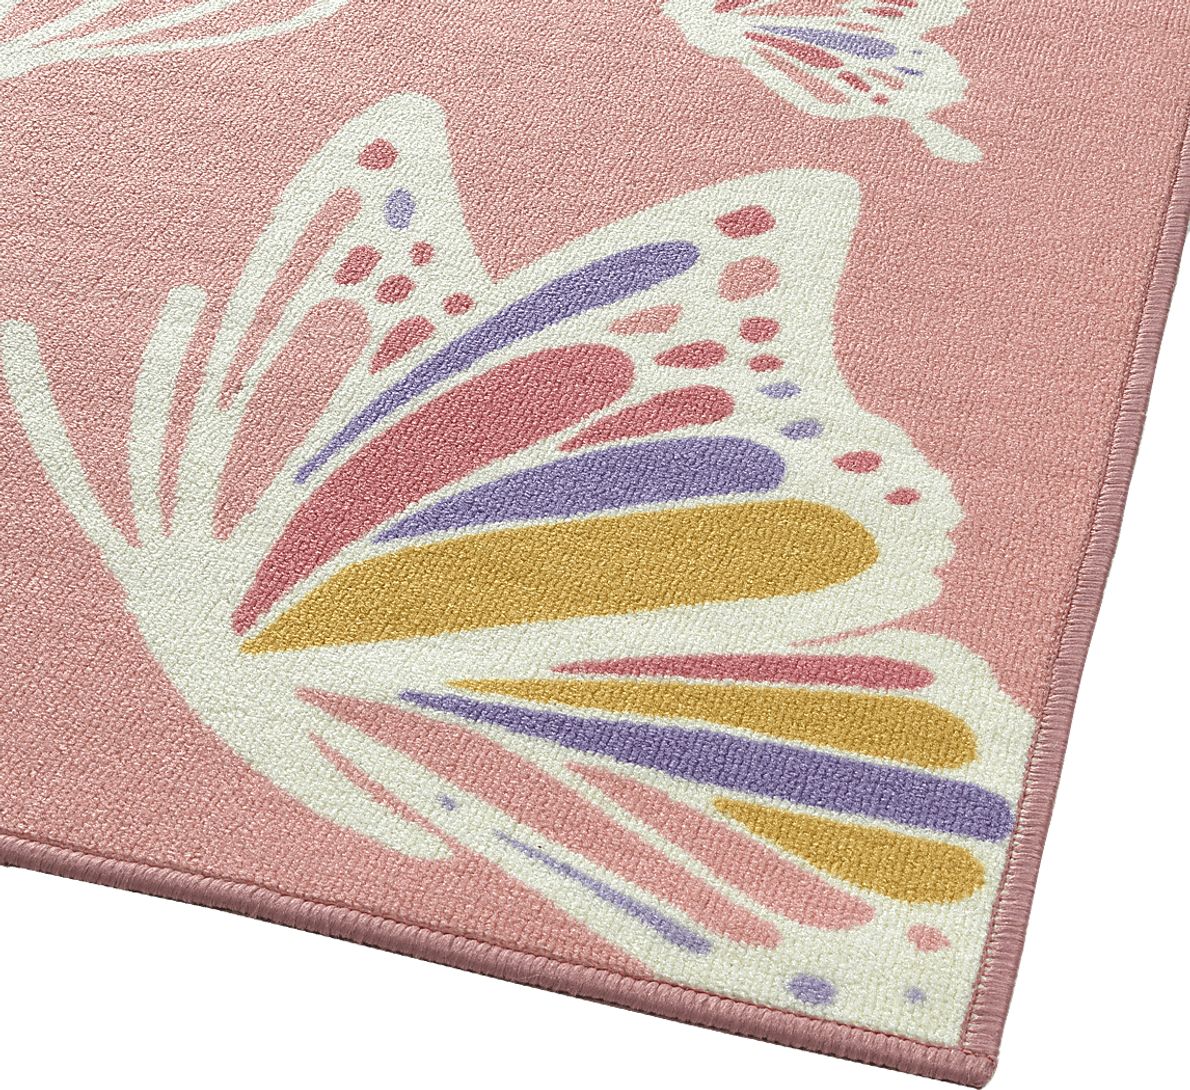 Kids Butterfly Spice Pink 5' x 7' Rug